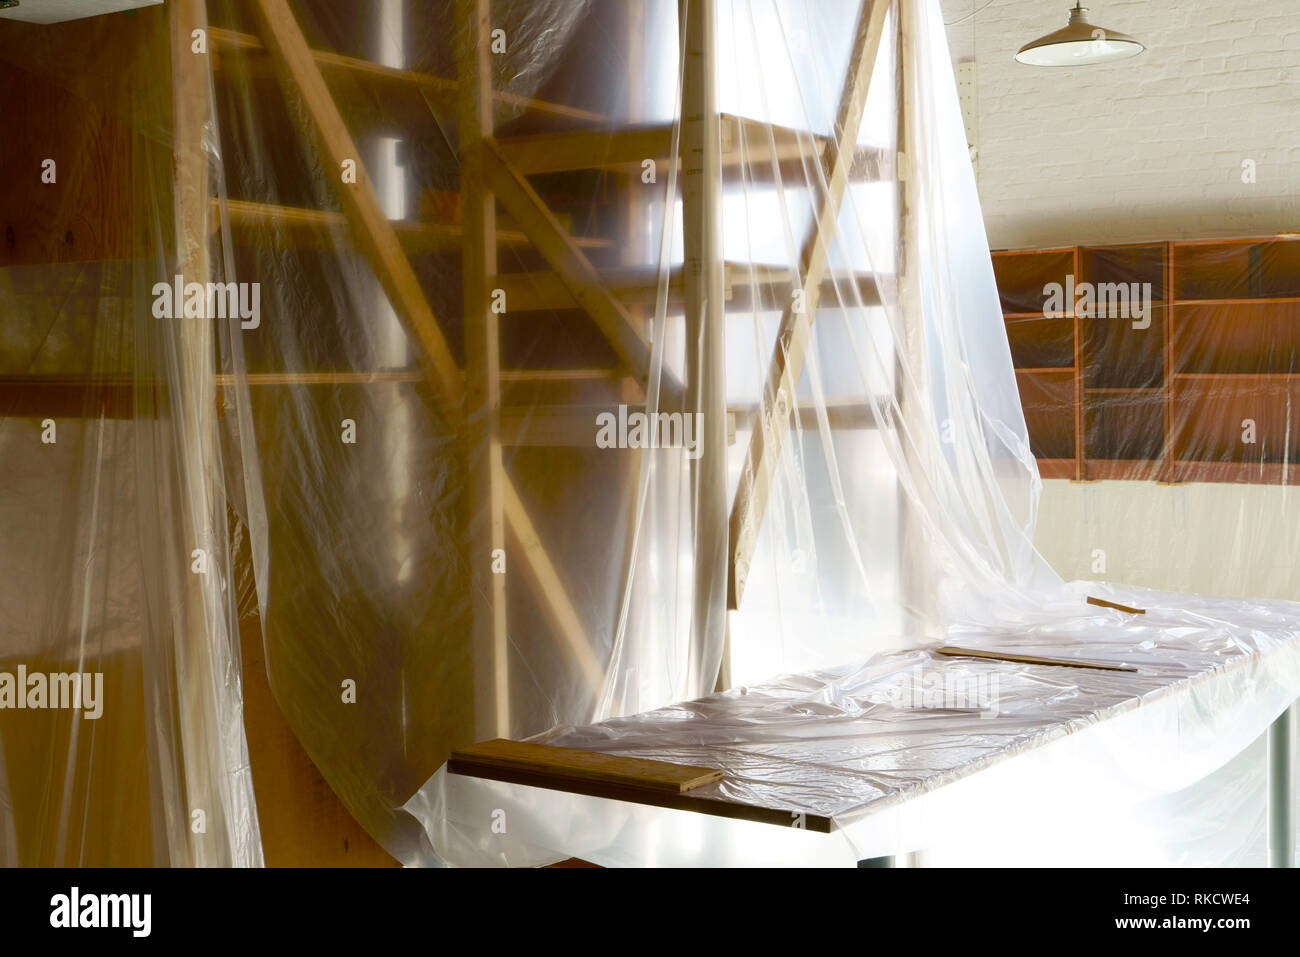 Empty space filled up with polythene, just moving in or moving out or ready for renovation. Stock Photo